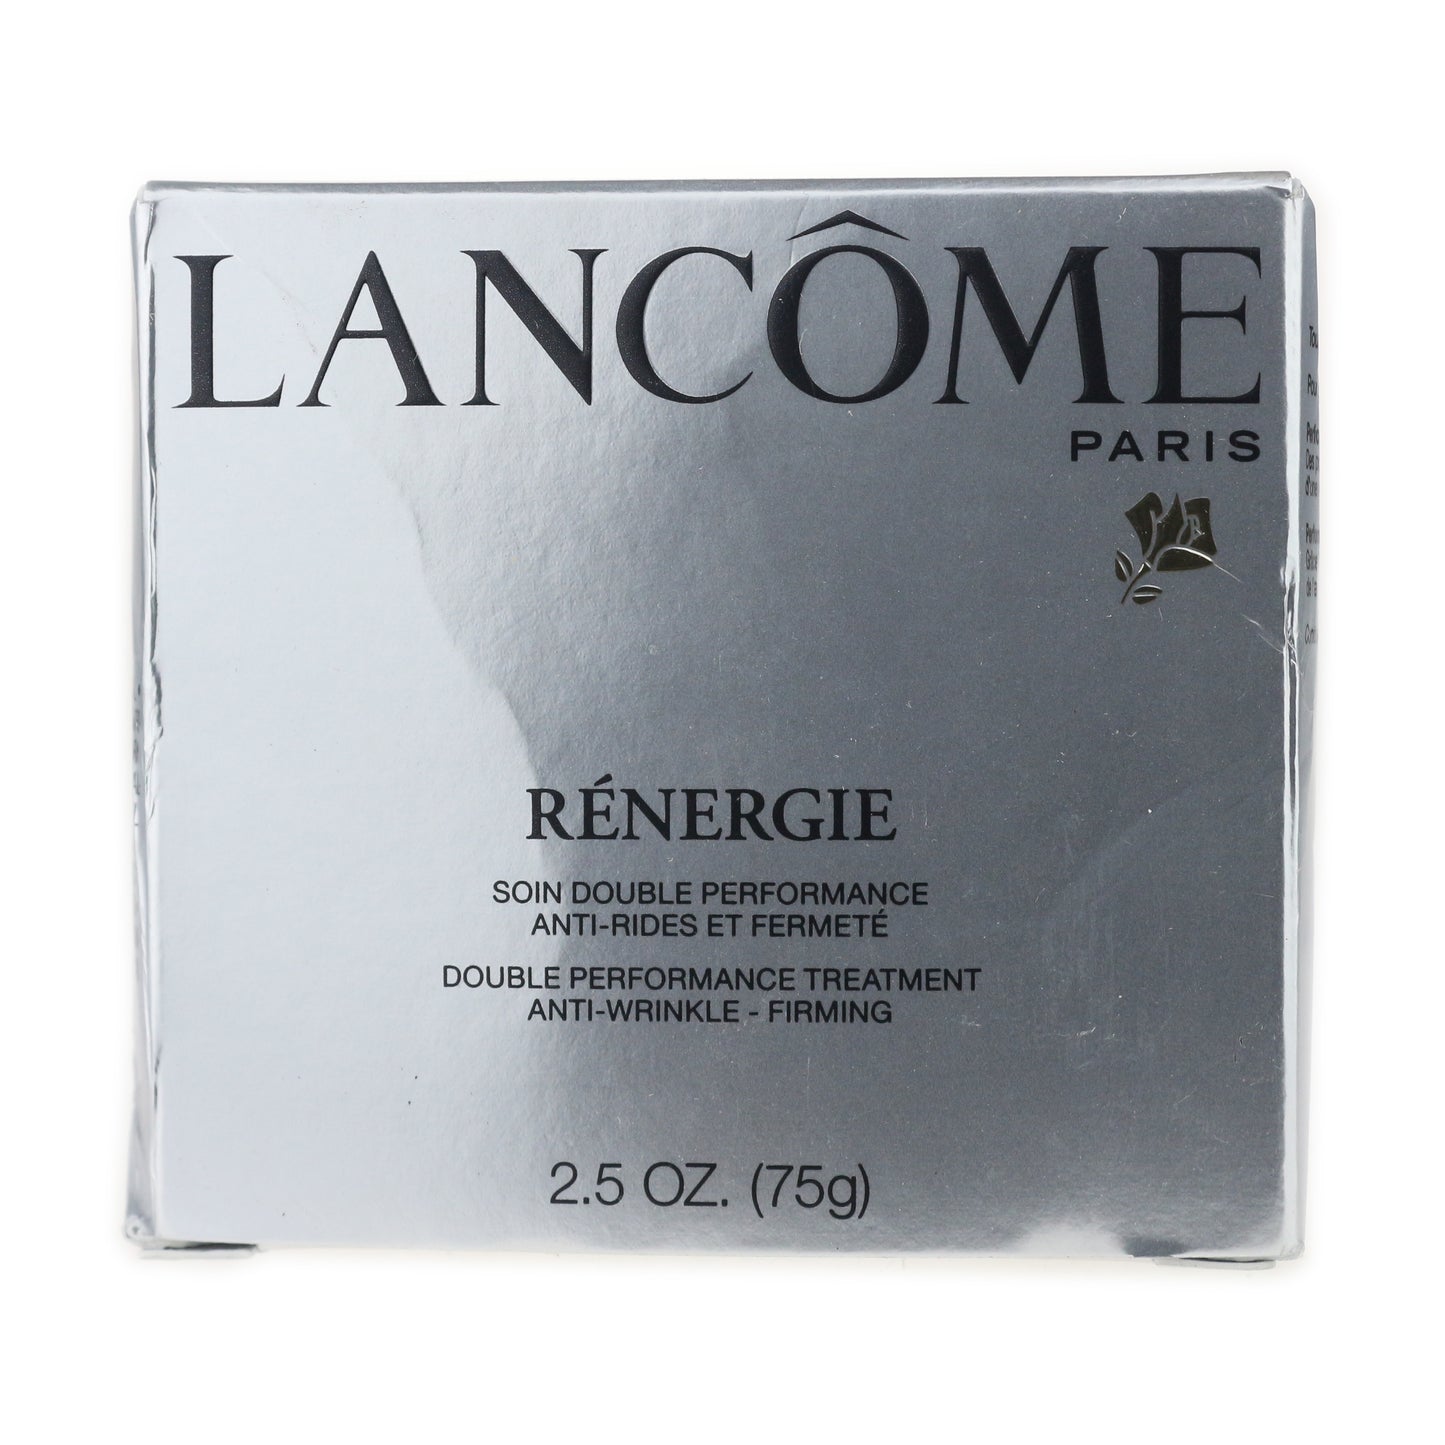 Lancome Renergie Double Performance Treatment Anti-Wrinkle Firming 2.5oz In Box